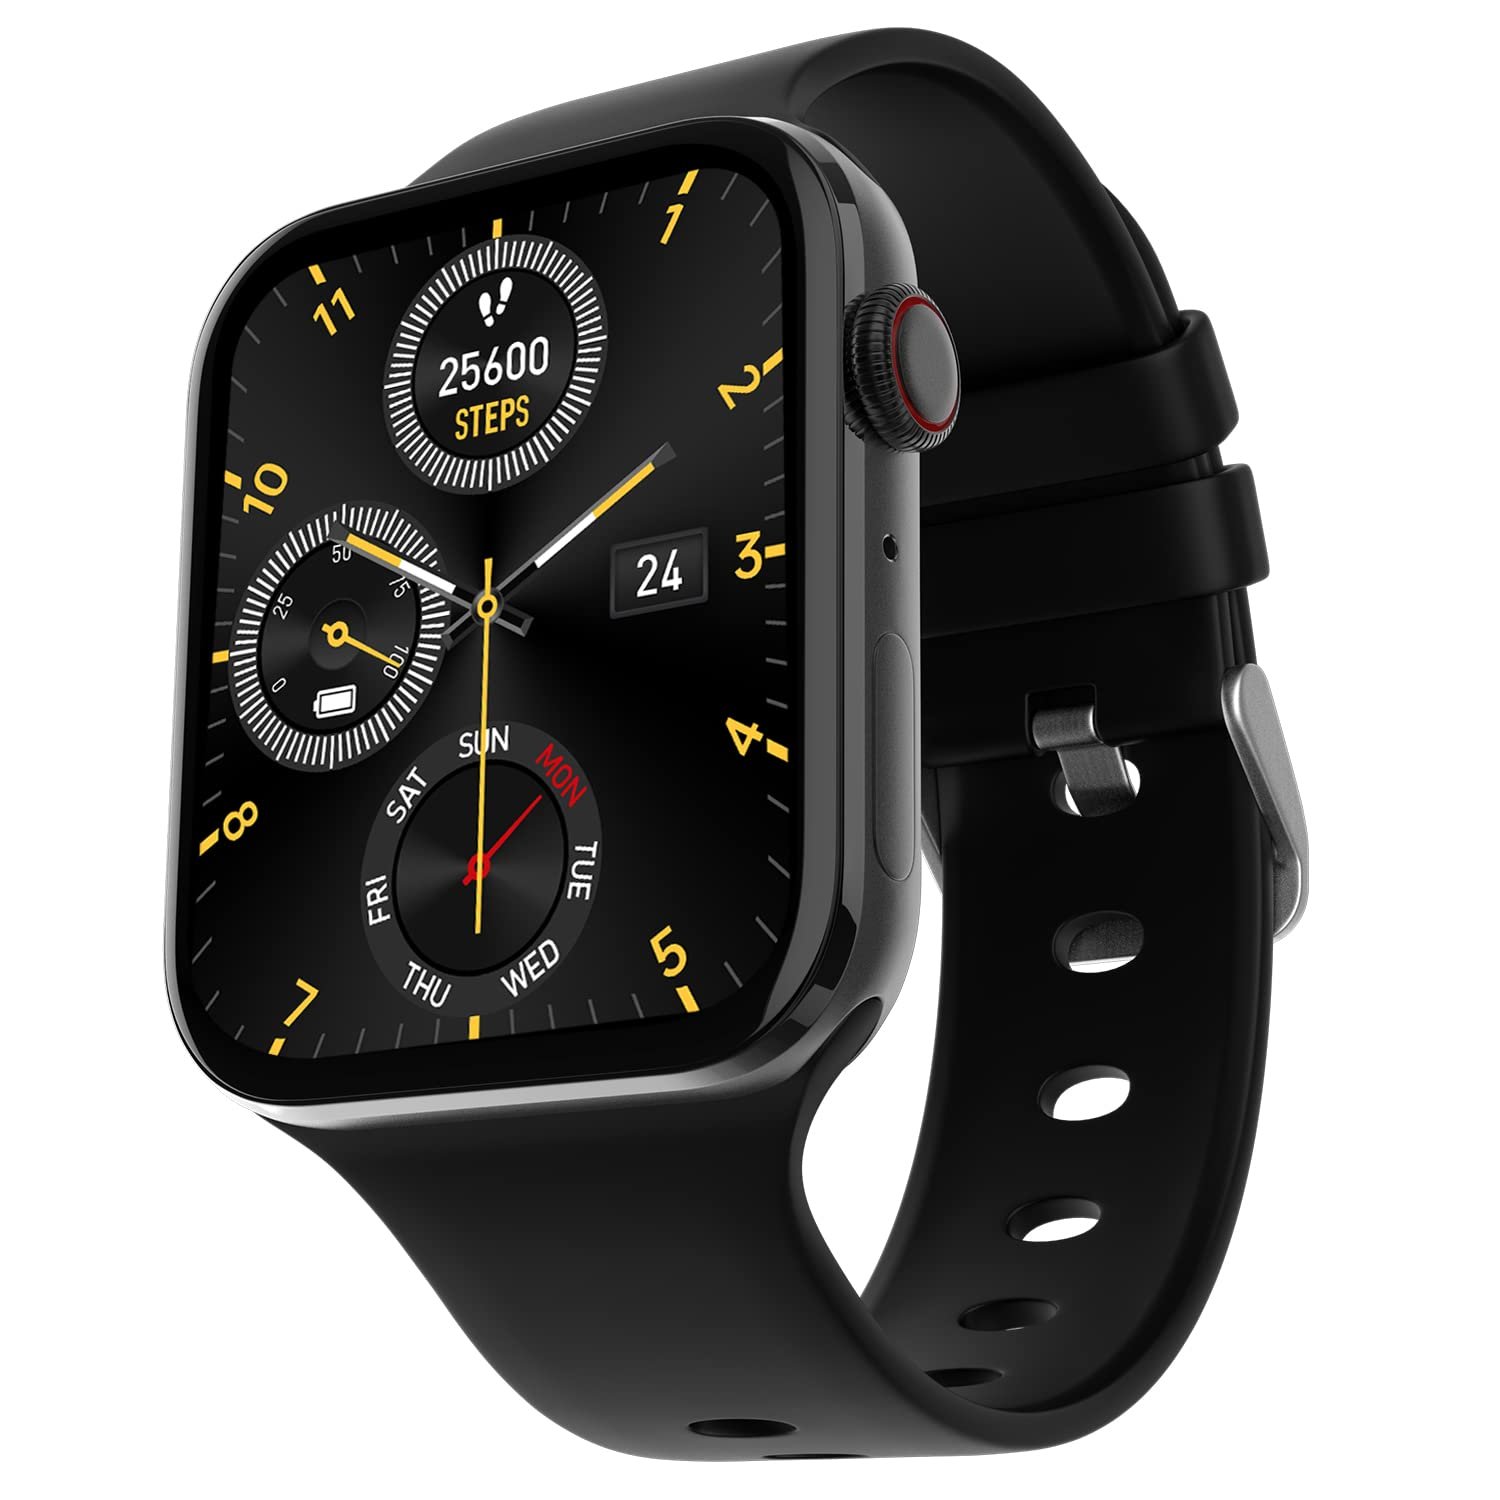 Fire-Boltt Visionary 1.78" AMOLED Bluetooth Calling Smartwatch with 368 * 448 Pixel Resolution, Rotating Crown & 60Hz Refresh Rate 100+ Sports Mode, TWS Connection, Voice Assistance (Black)